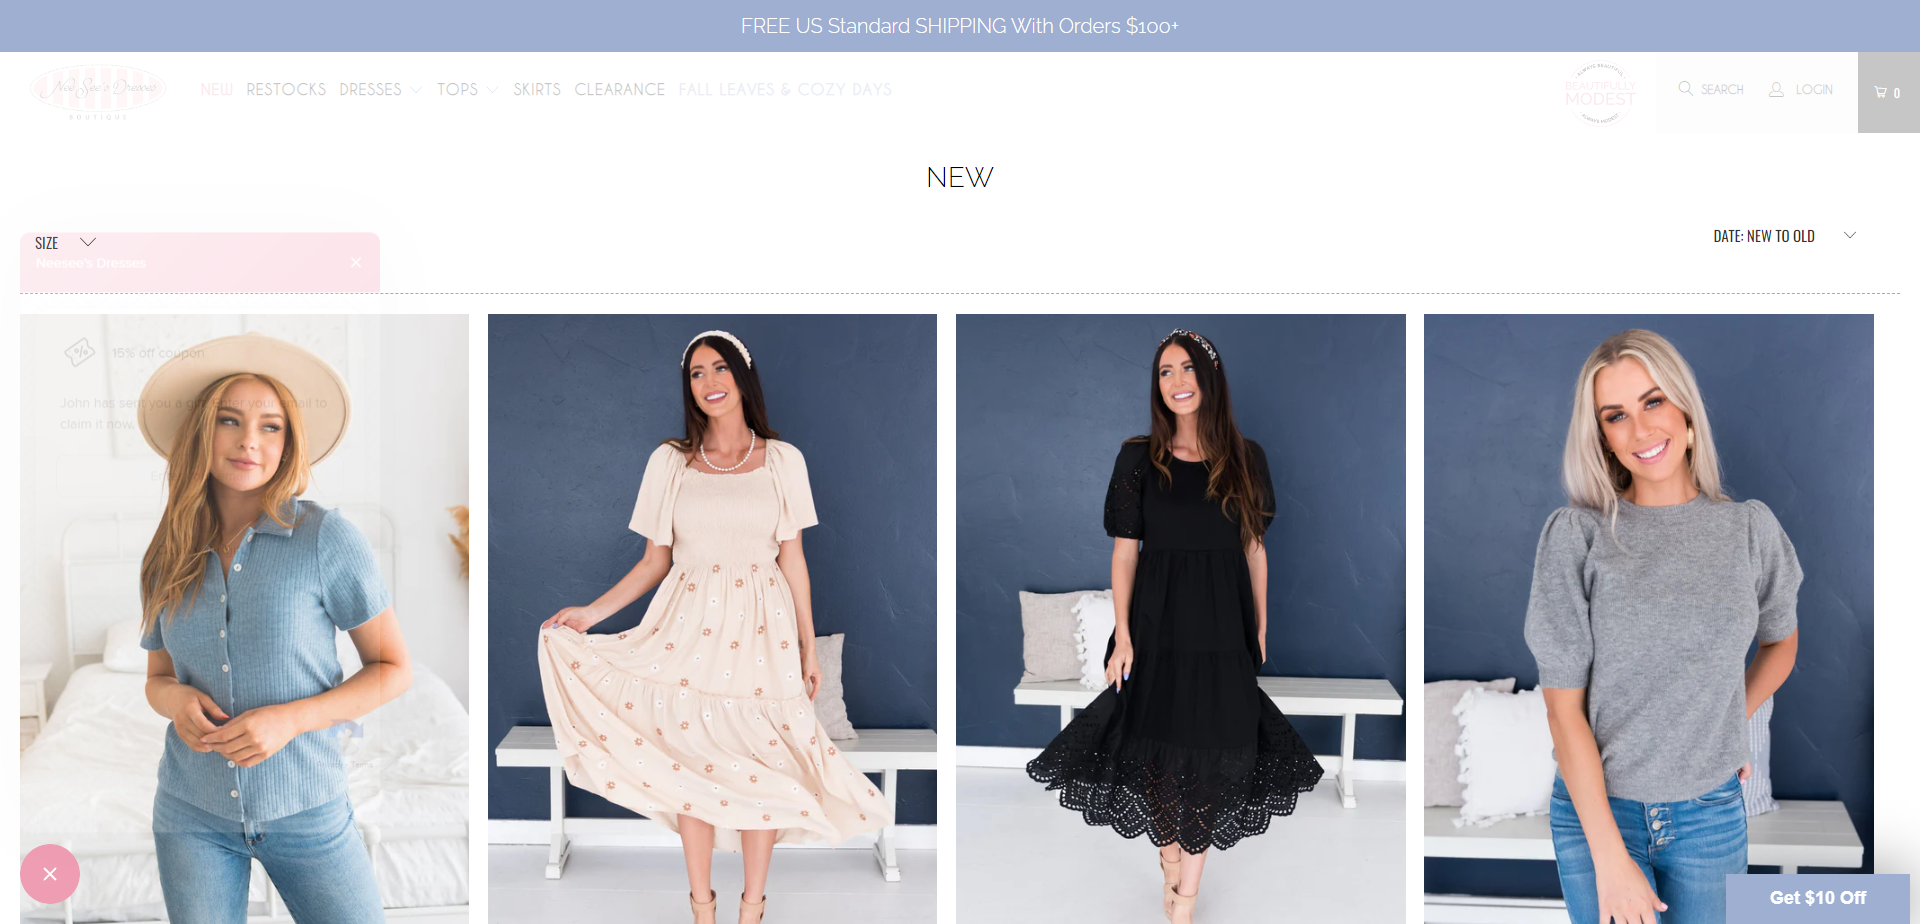 Referral Landing Page for NeeSee Dresses